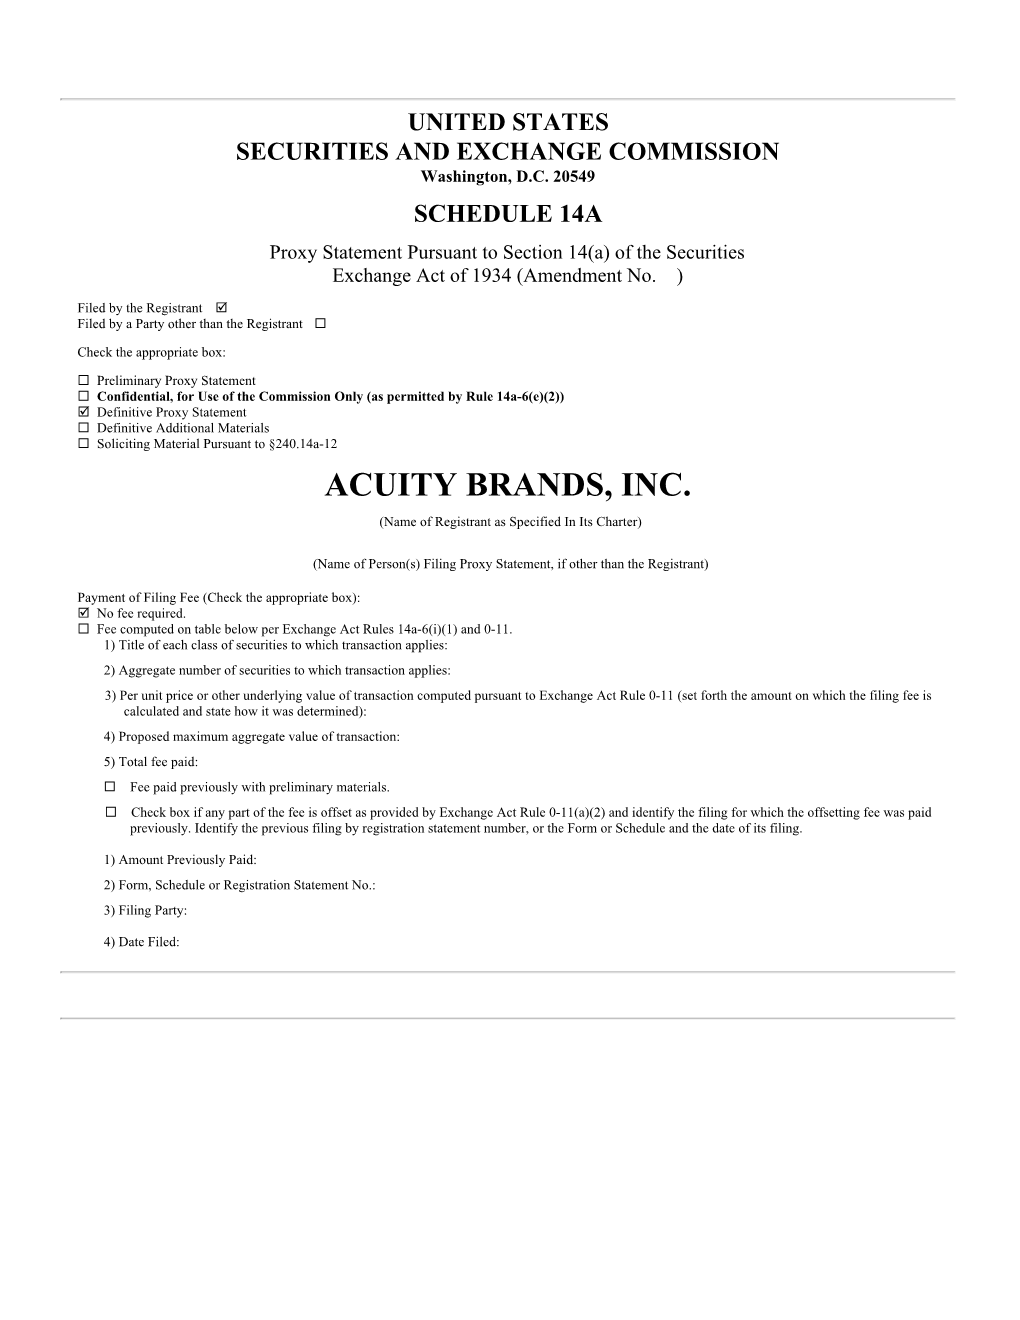 Acuity Brands, Inc